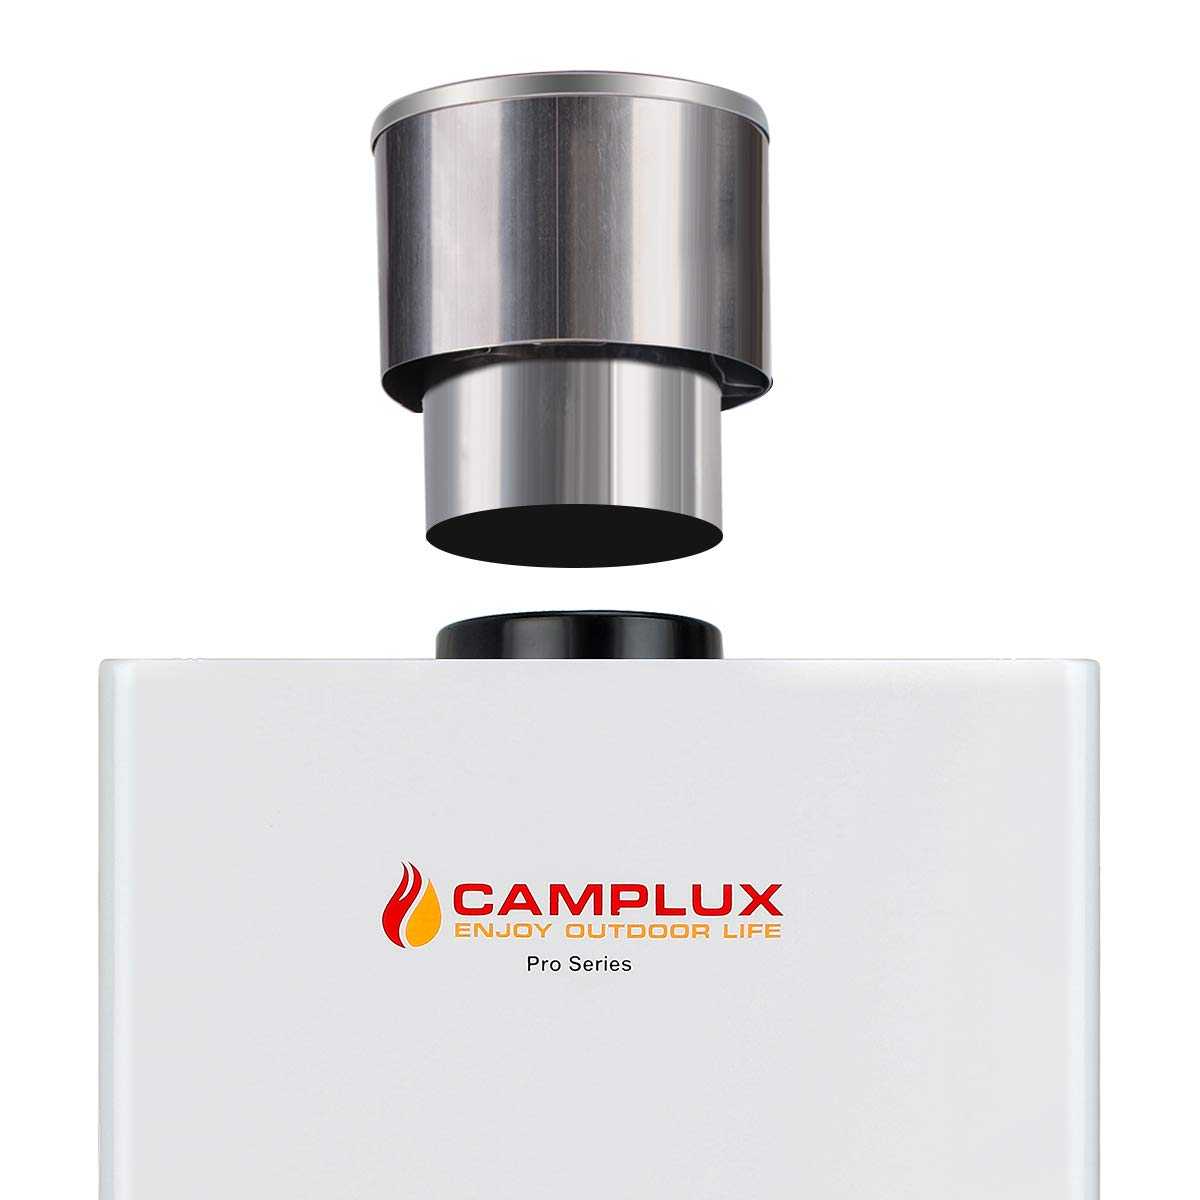 Camplux 3.54''(90mm) Rain Cap, Stainless Steel Rain Cap for Tankless Water Heater, Rain-Proof & Windproof Cap for Gas Water Heater, Perfect for Outdoor Installation